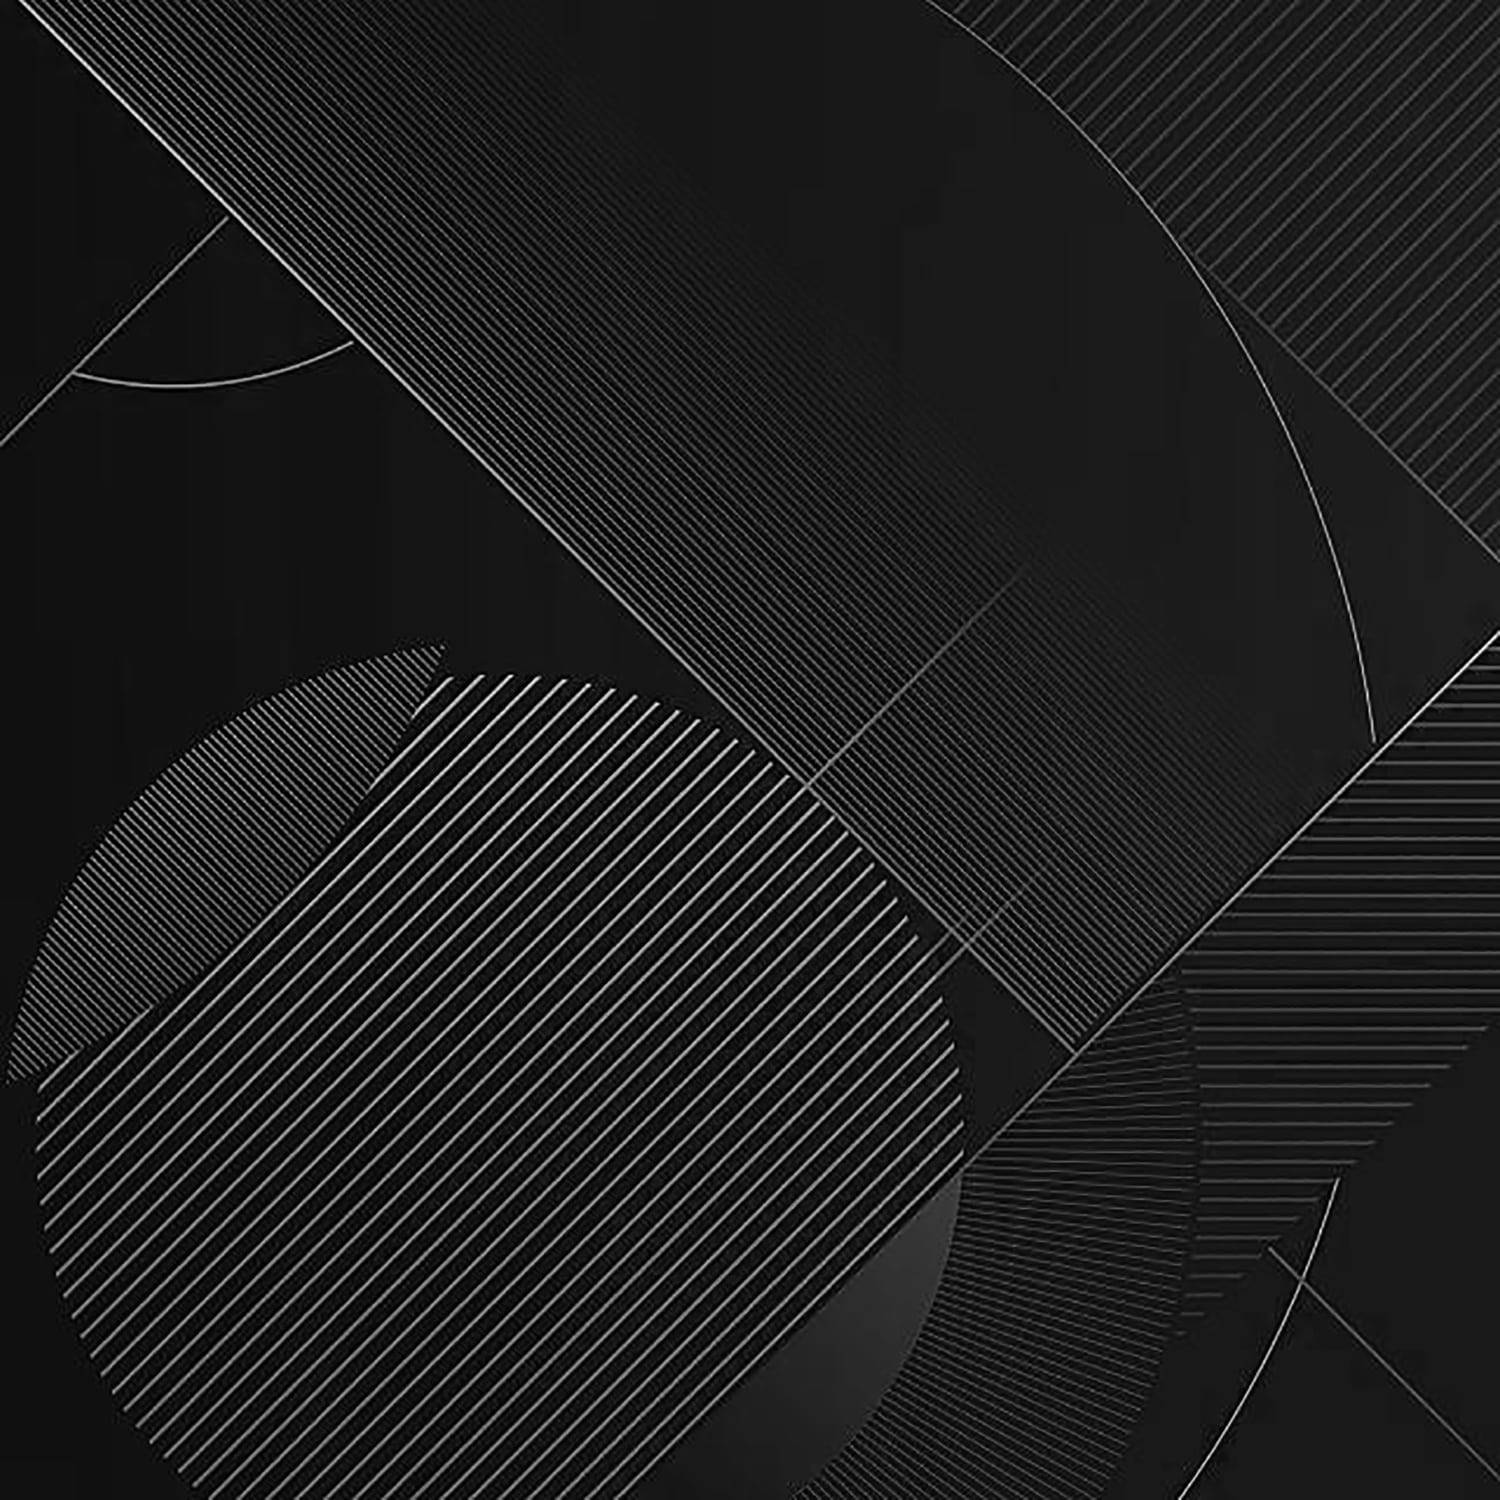 Abstract Striped Line Art Black Pattern